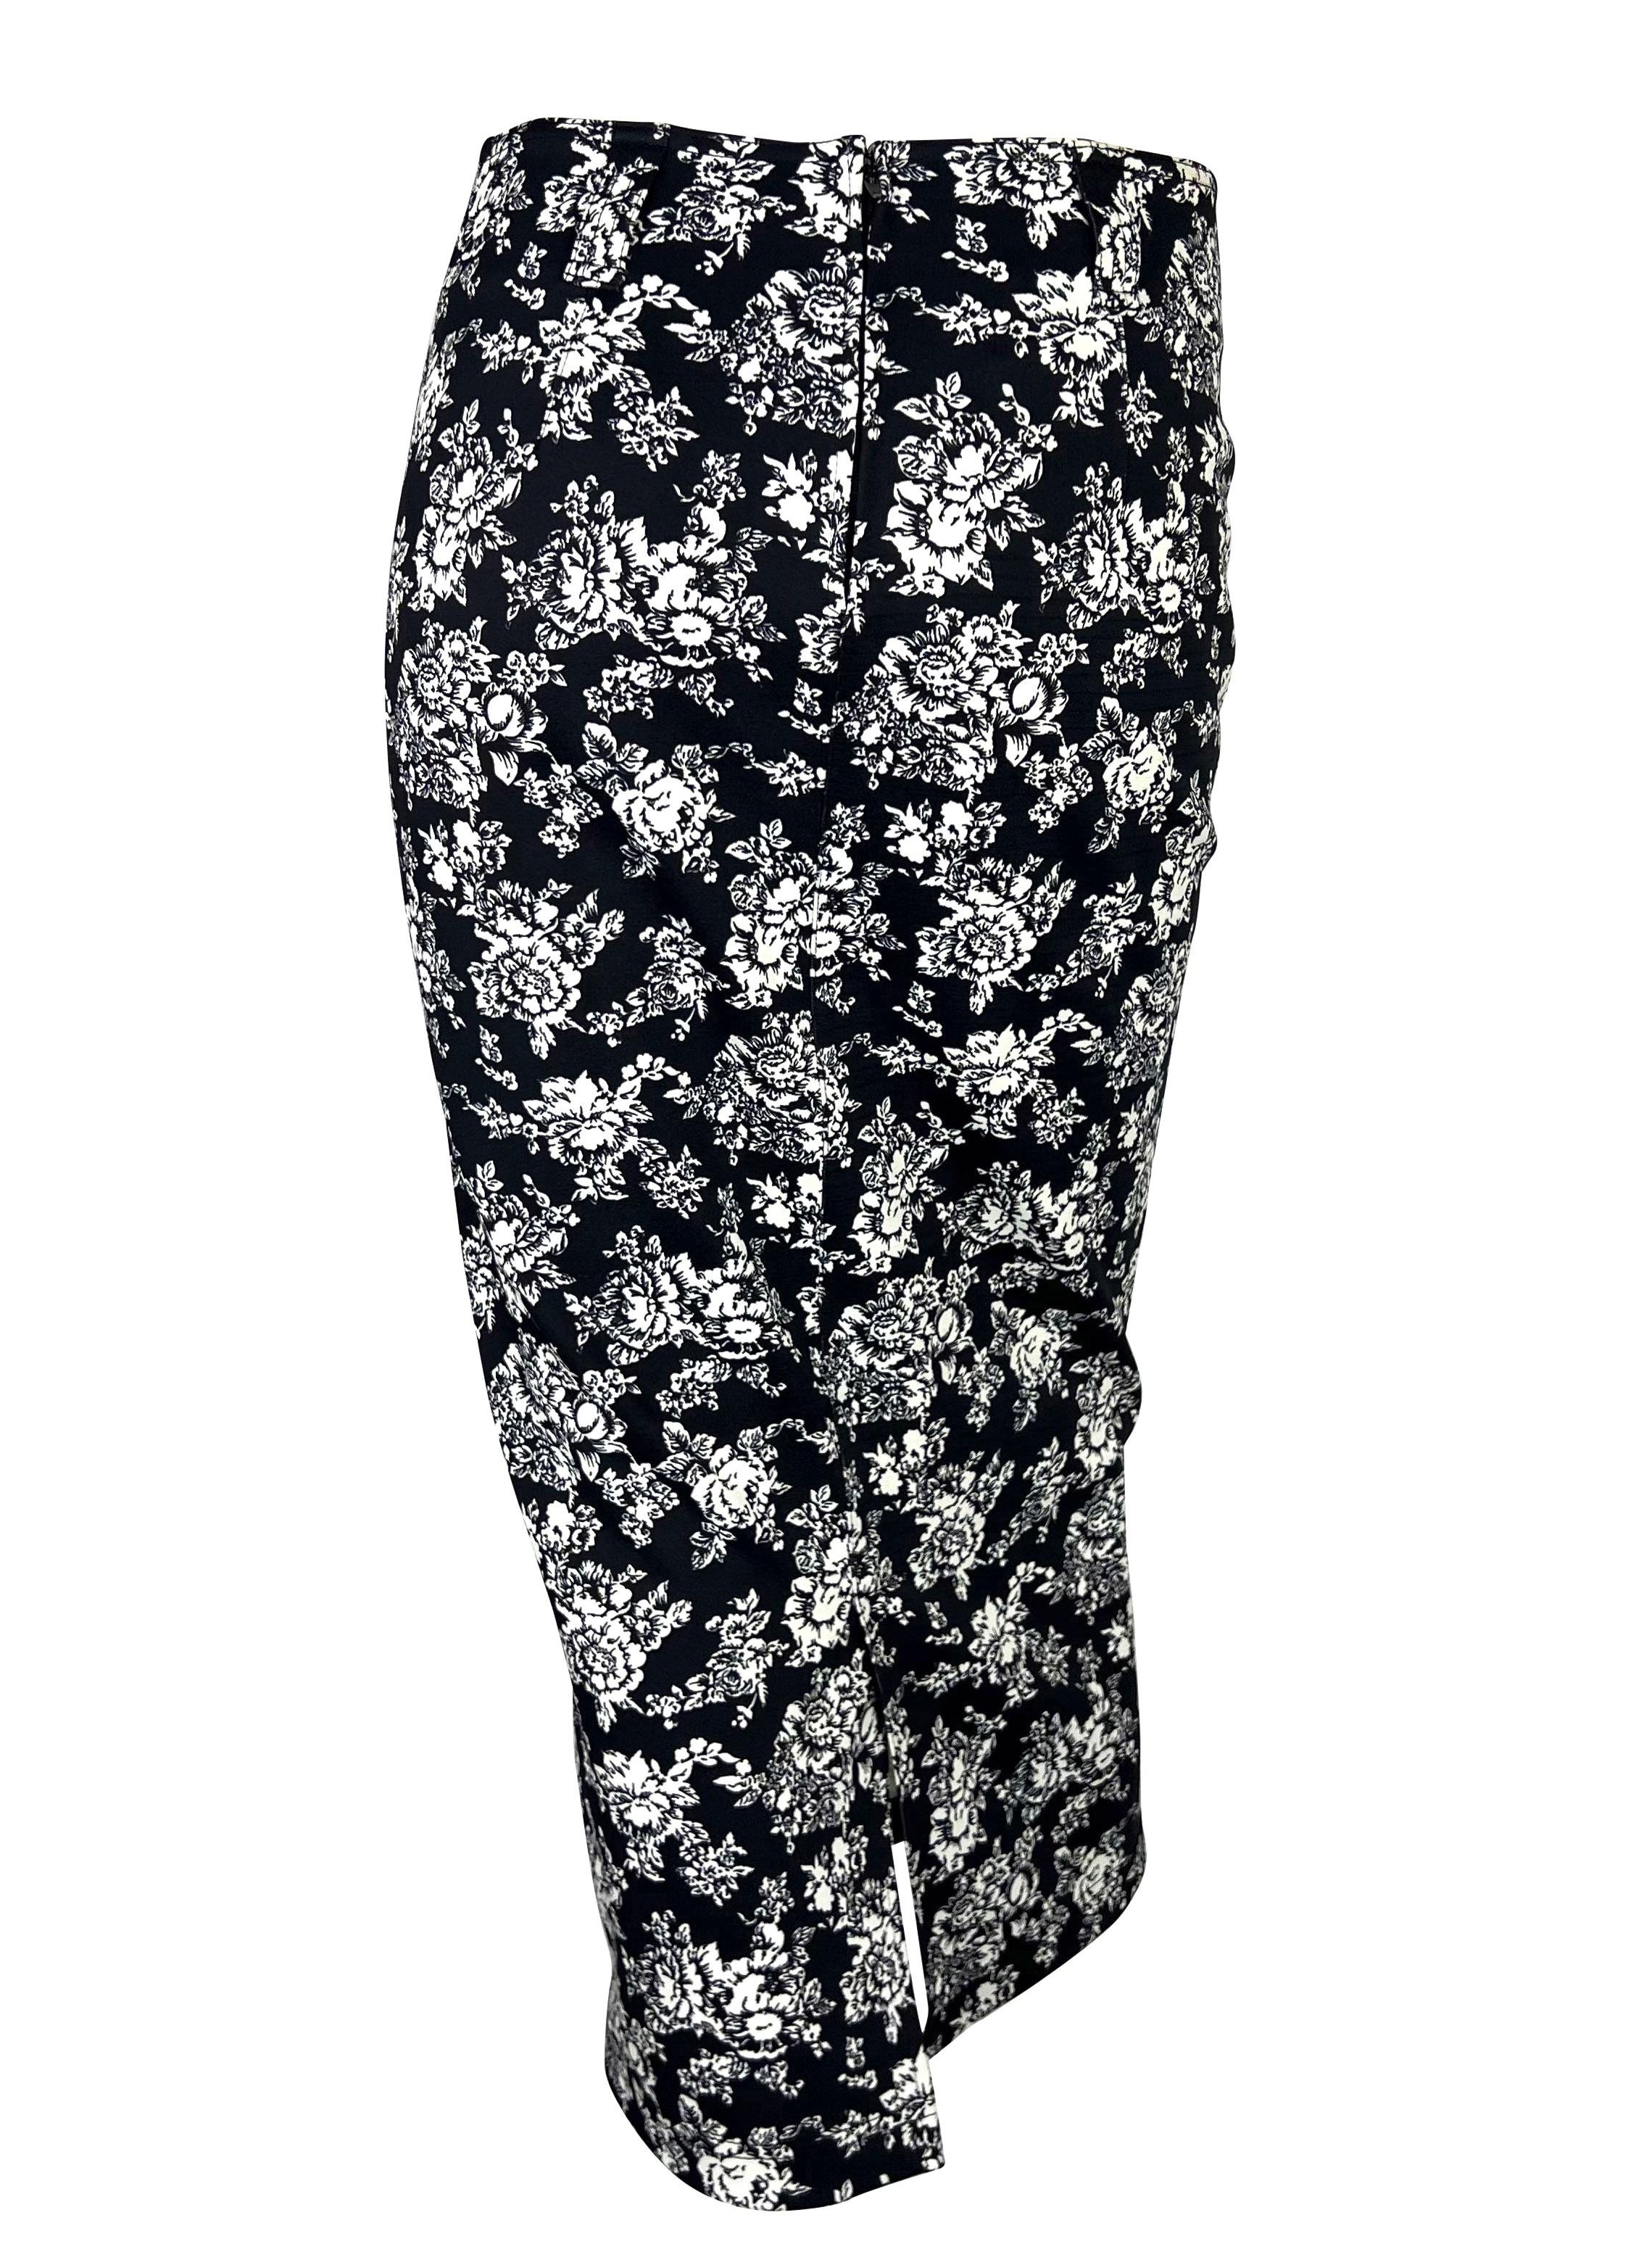 S/S 1993 Gianni Versace Black White Floral Stretch Spandex Rubber Blend Skirt In Good Condition For Sale In West Hollywood, CA